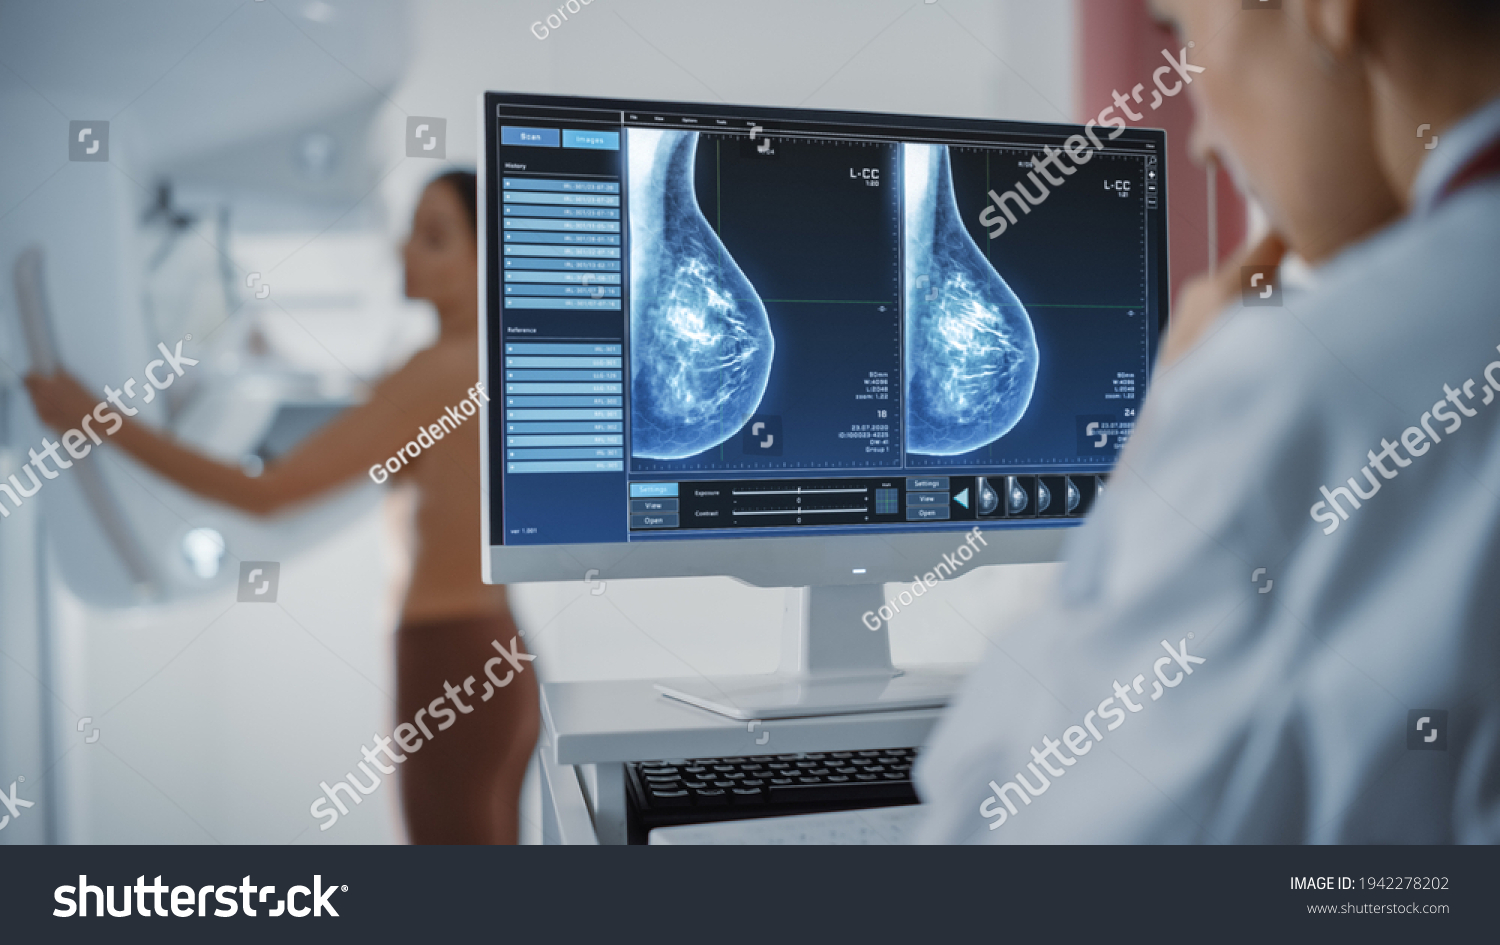 Computer Screen in Hospital Radiology Room: Beautiful Multiethnic Adult Woman Standing Topless Undergoing Mammography Screening Procedure. Screen Showing the Mammogram Scans of Dense Breast Tissues. #1942278202